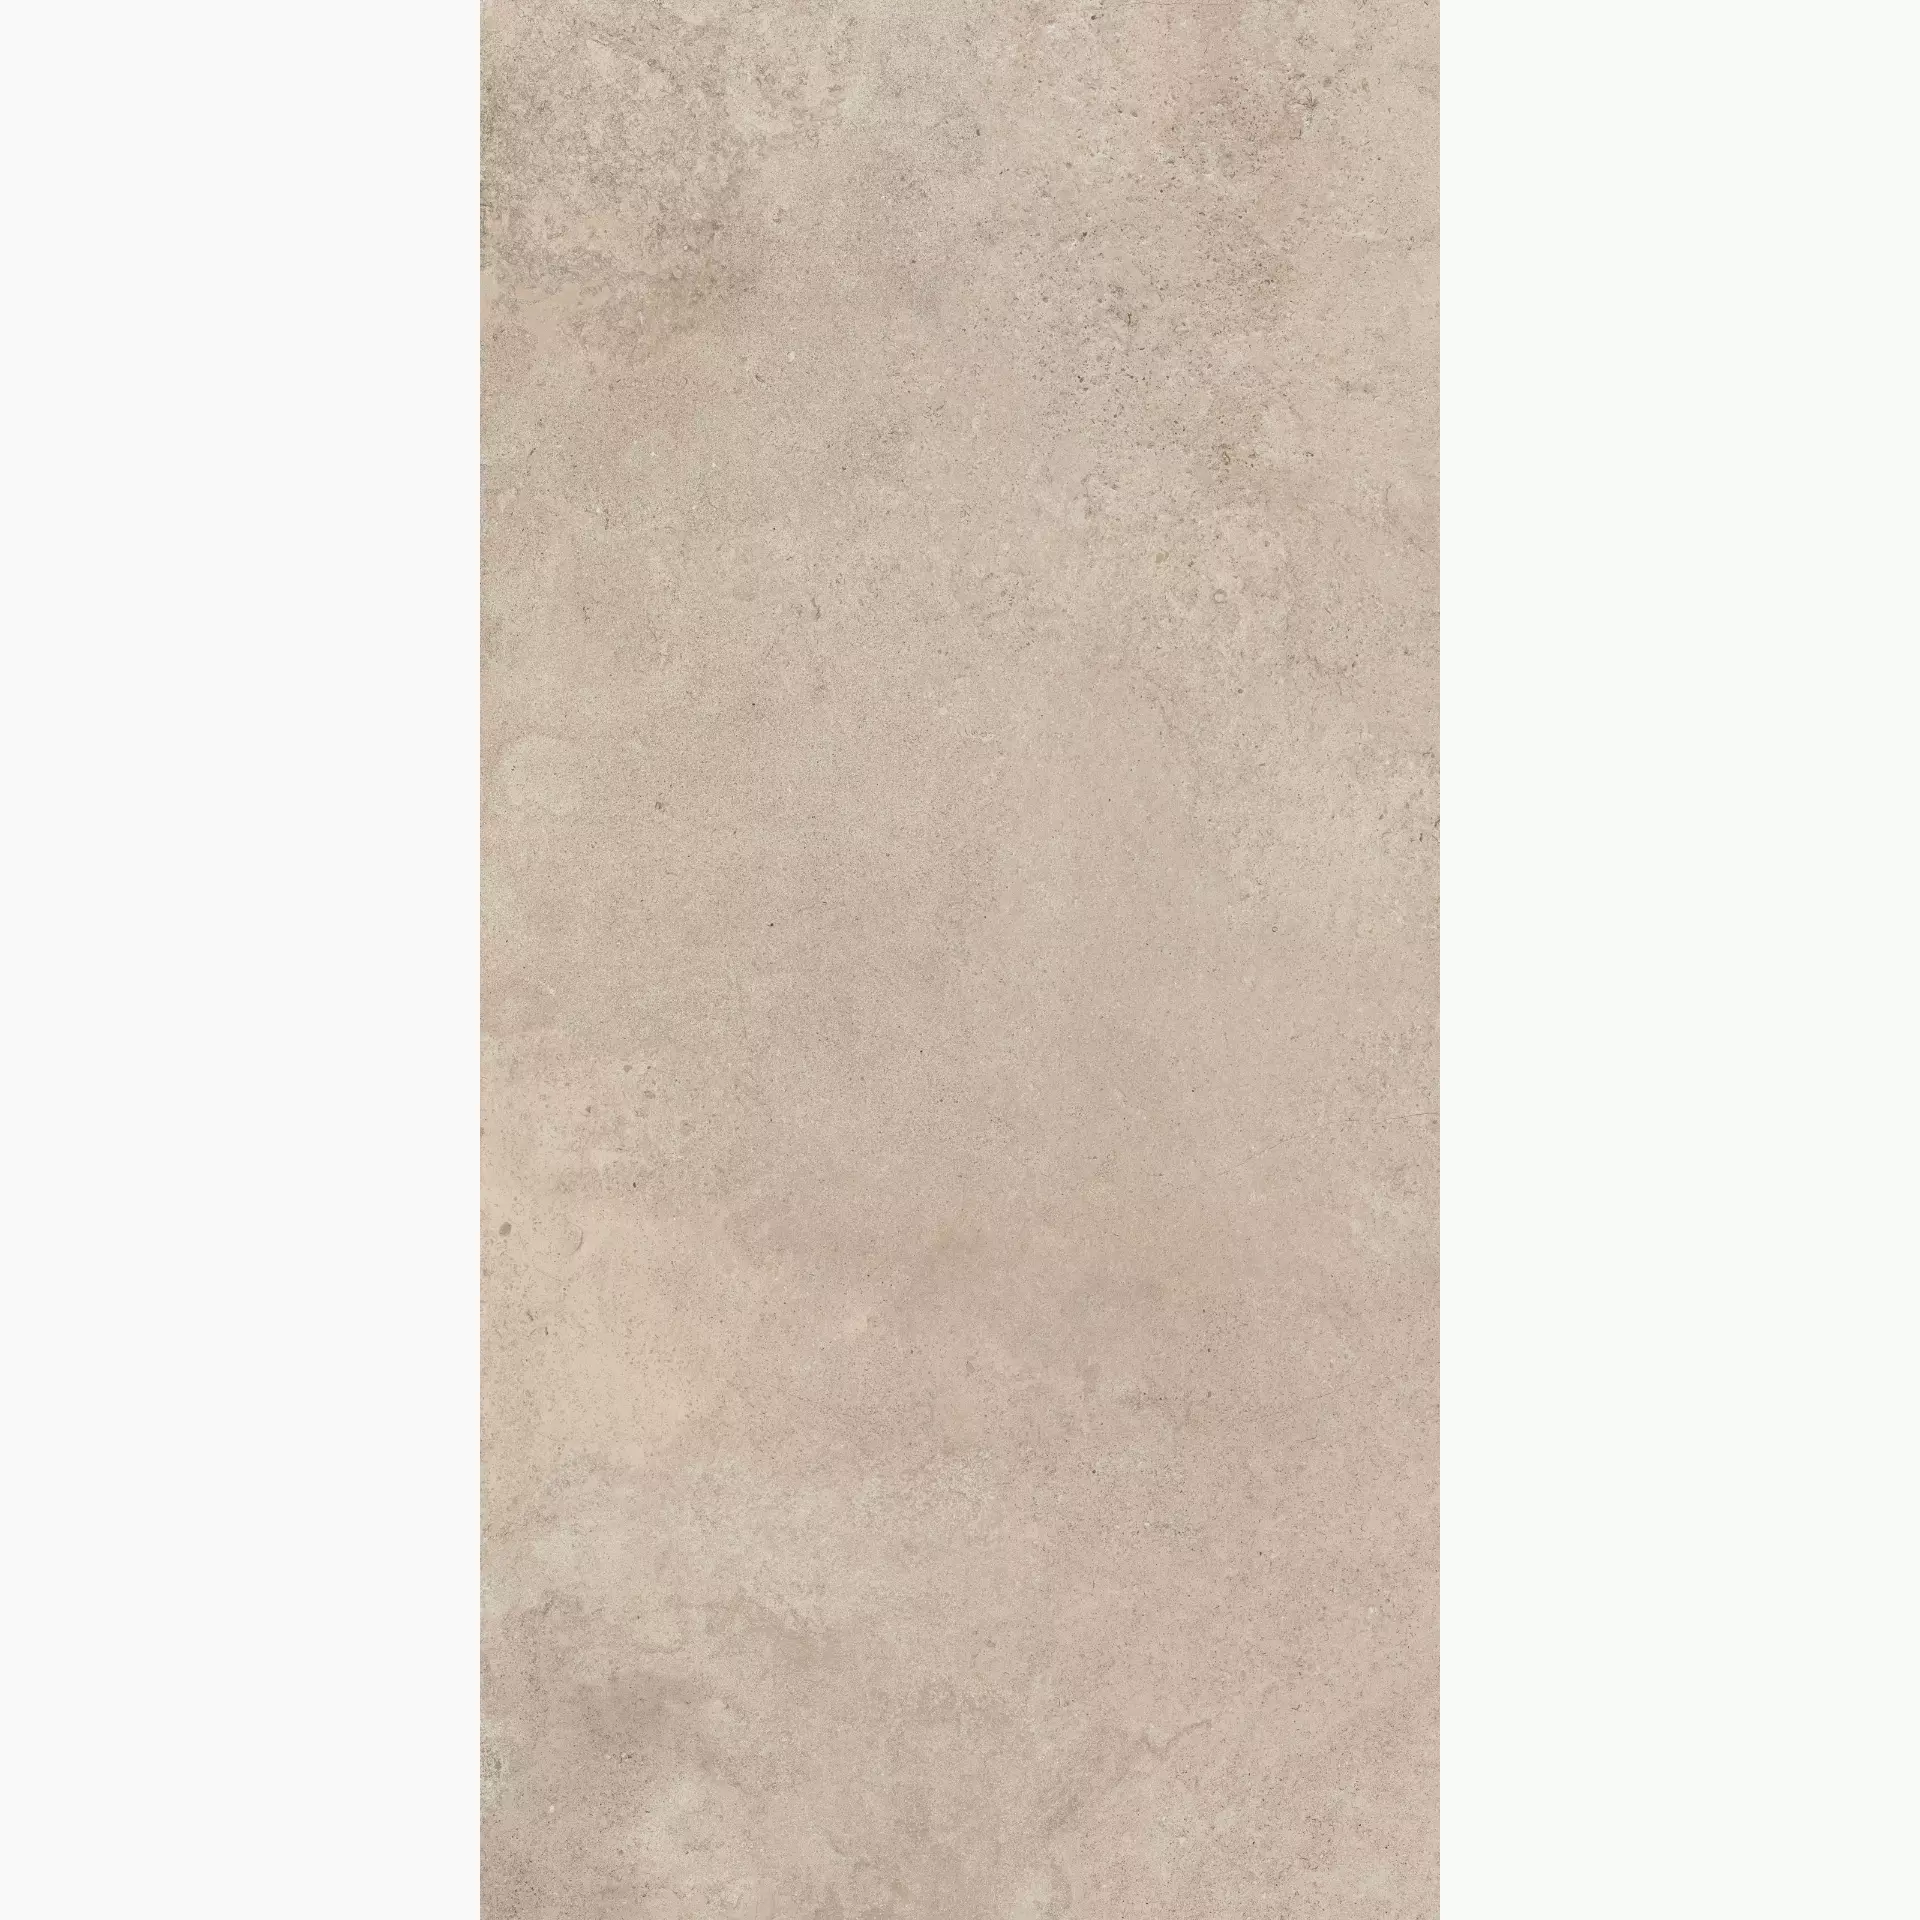 ABK Alpes Wide Sand Naturale PF60000206 80x160cm rectified 8,5mm